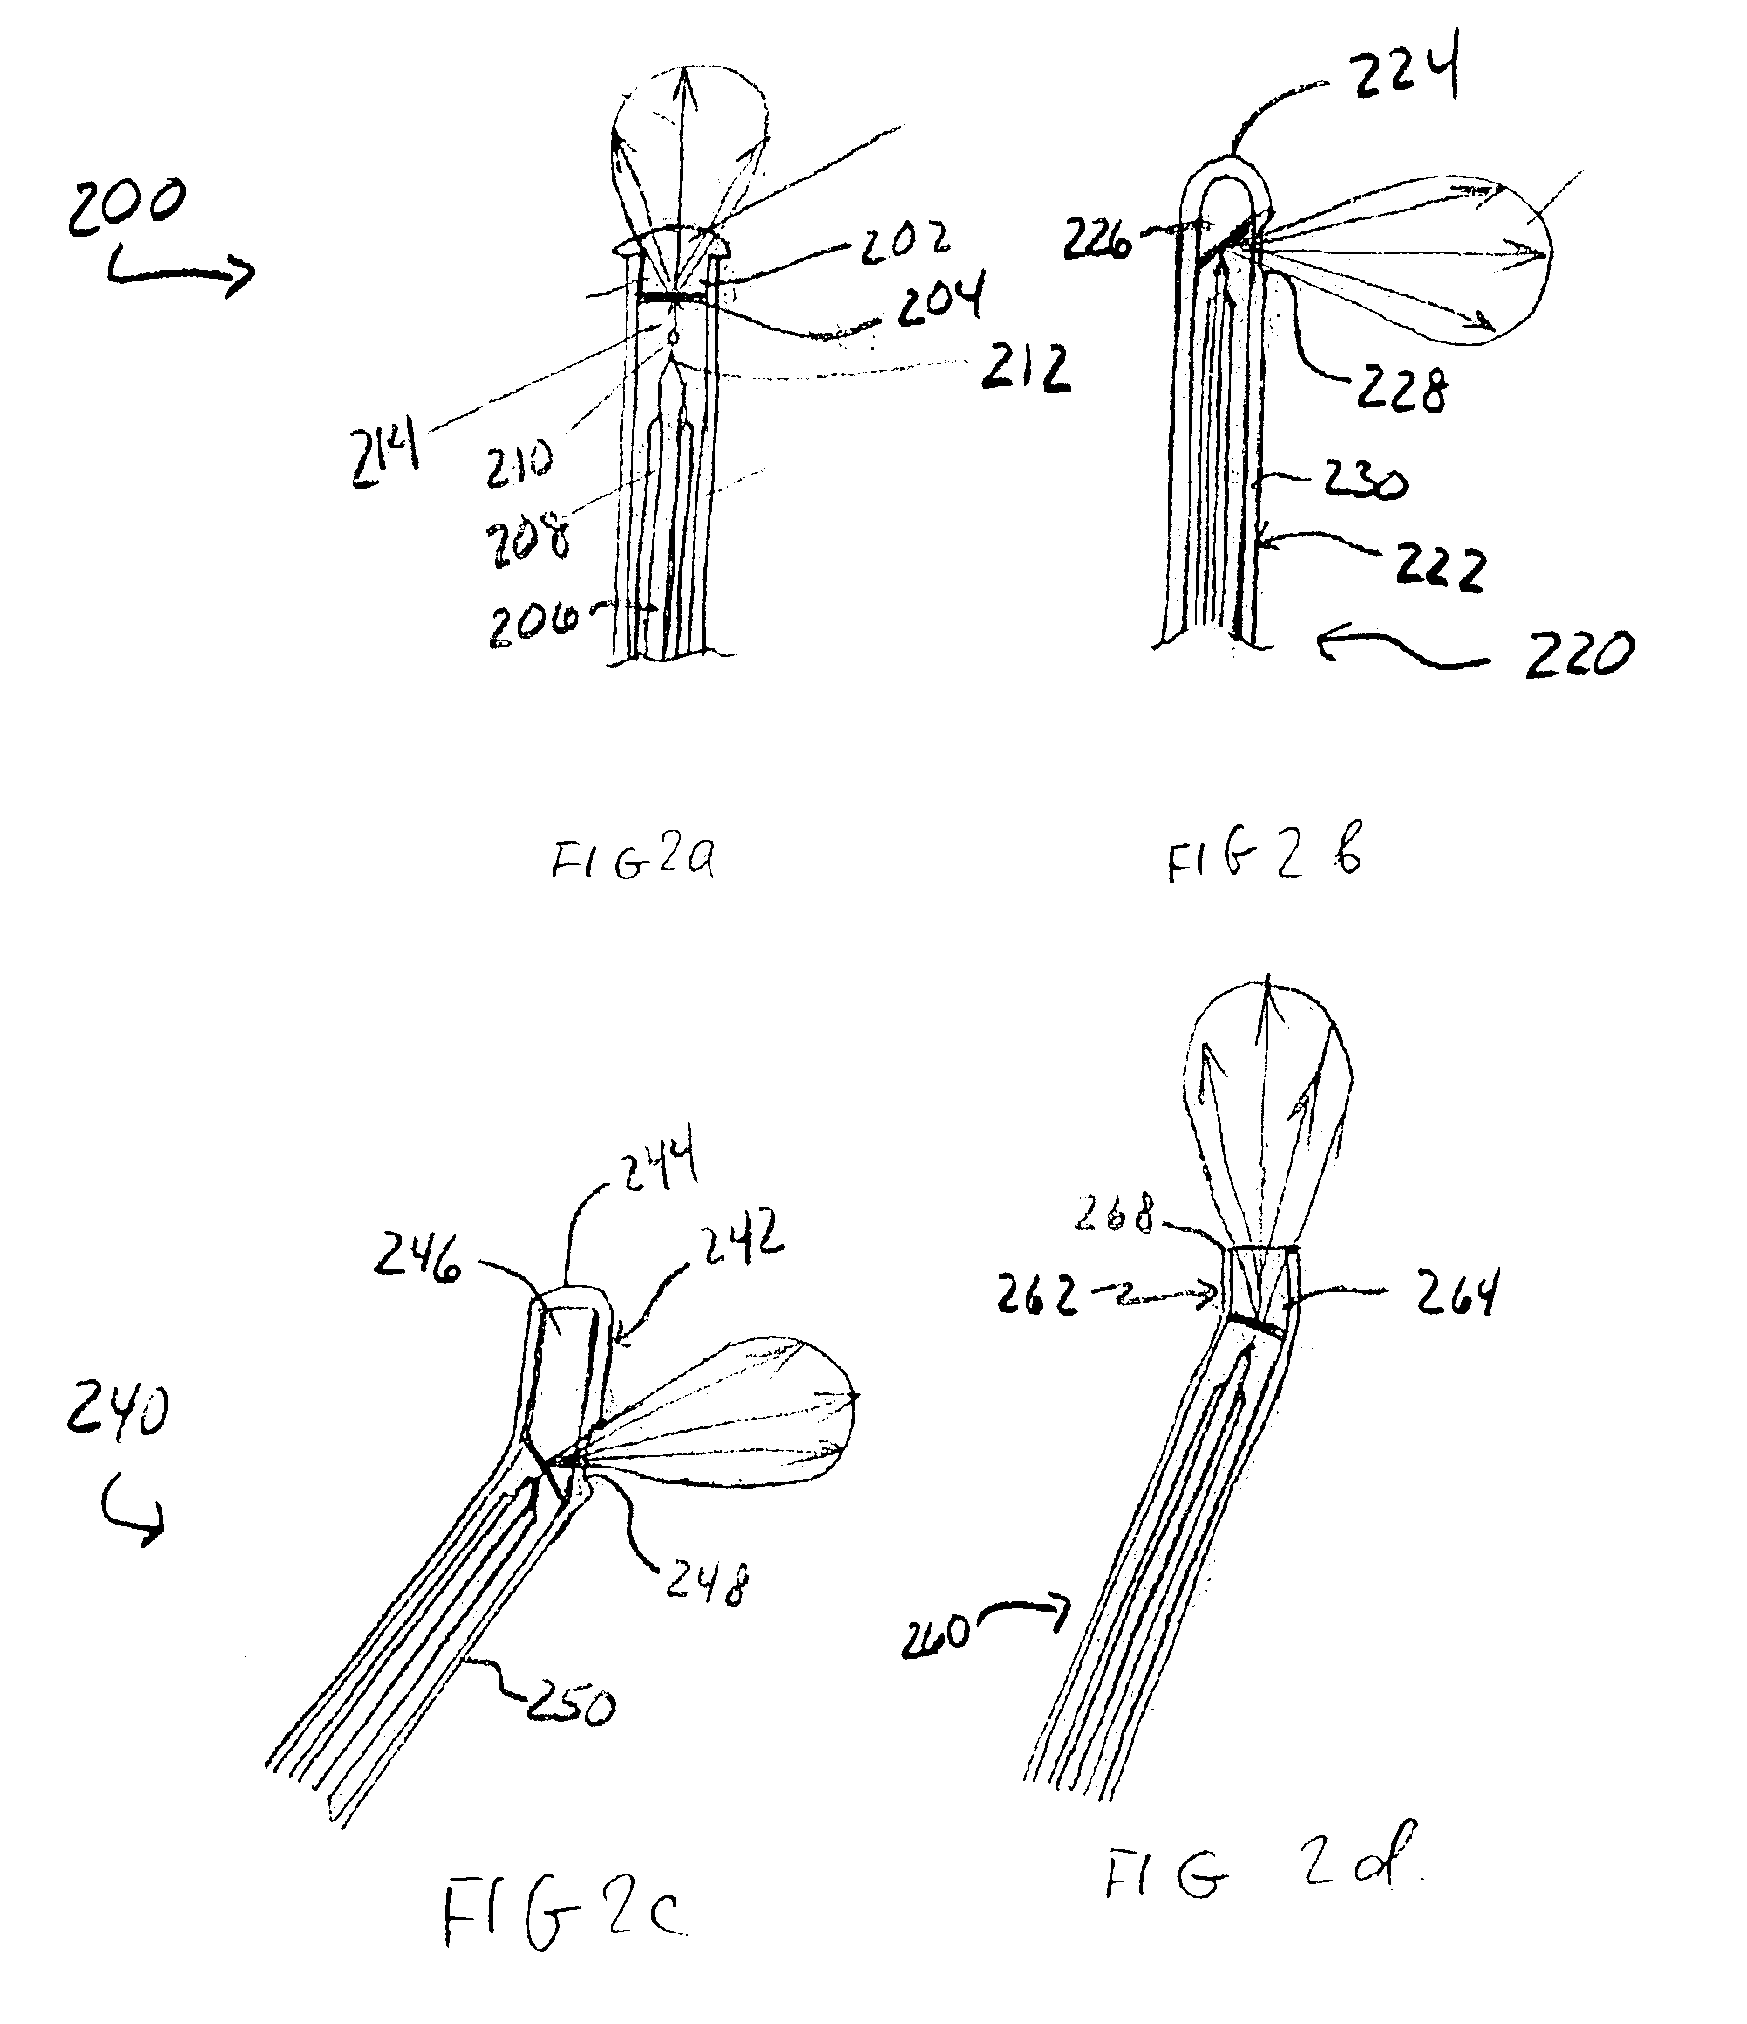 X-ray apparatus with field emission current stabilization and method of providing x-ray radiation therapy